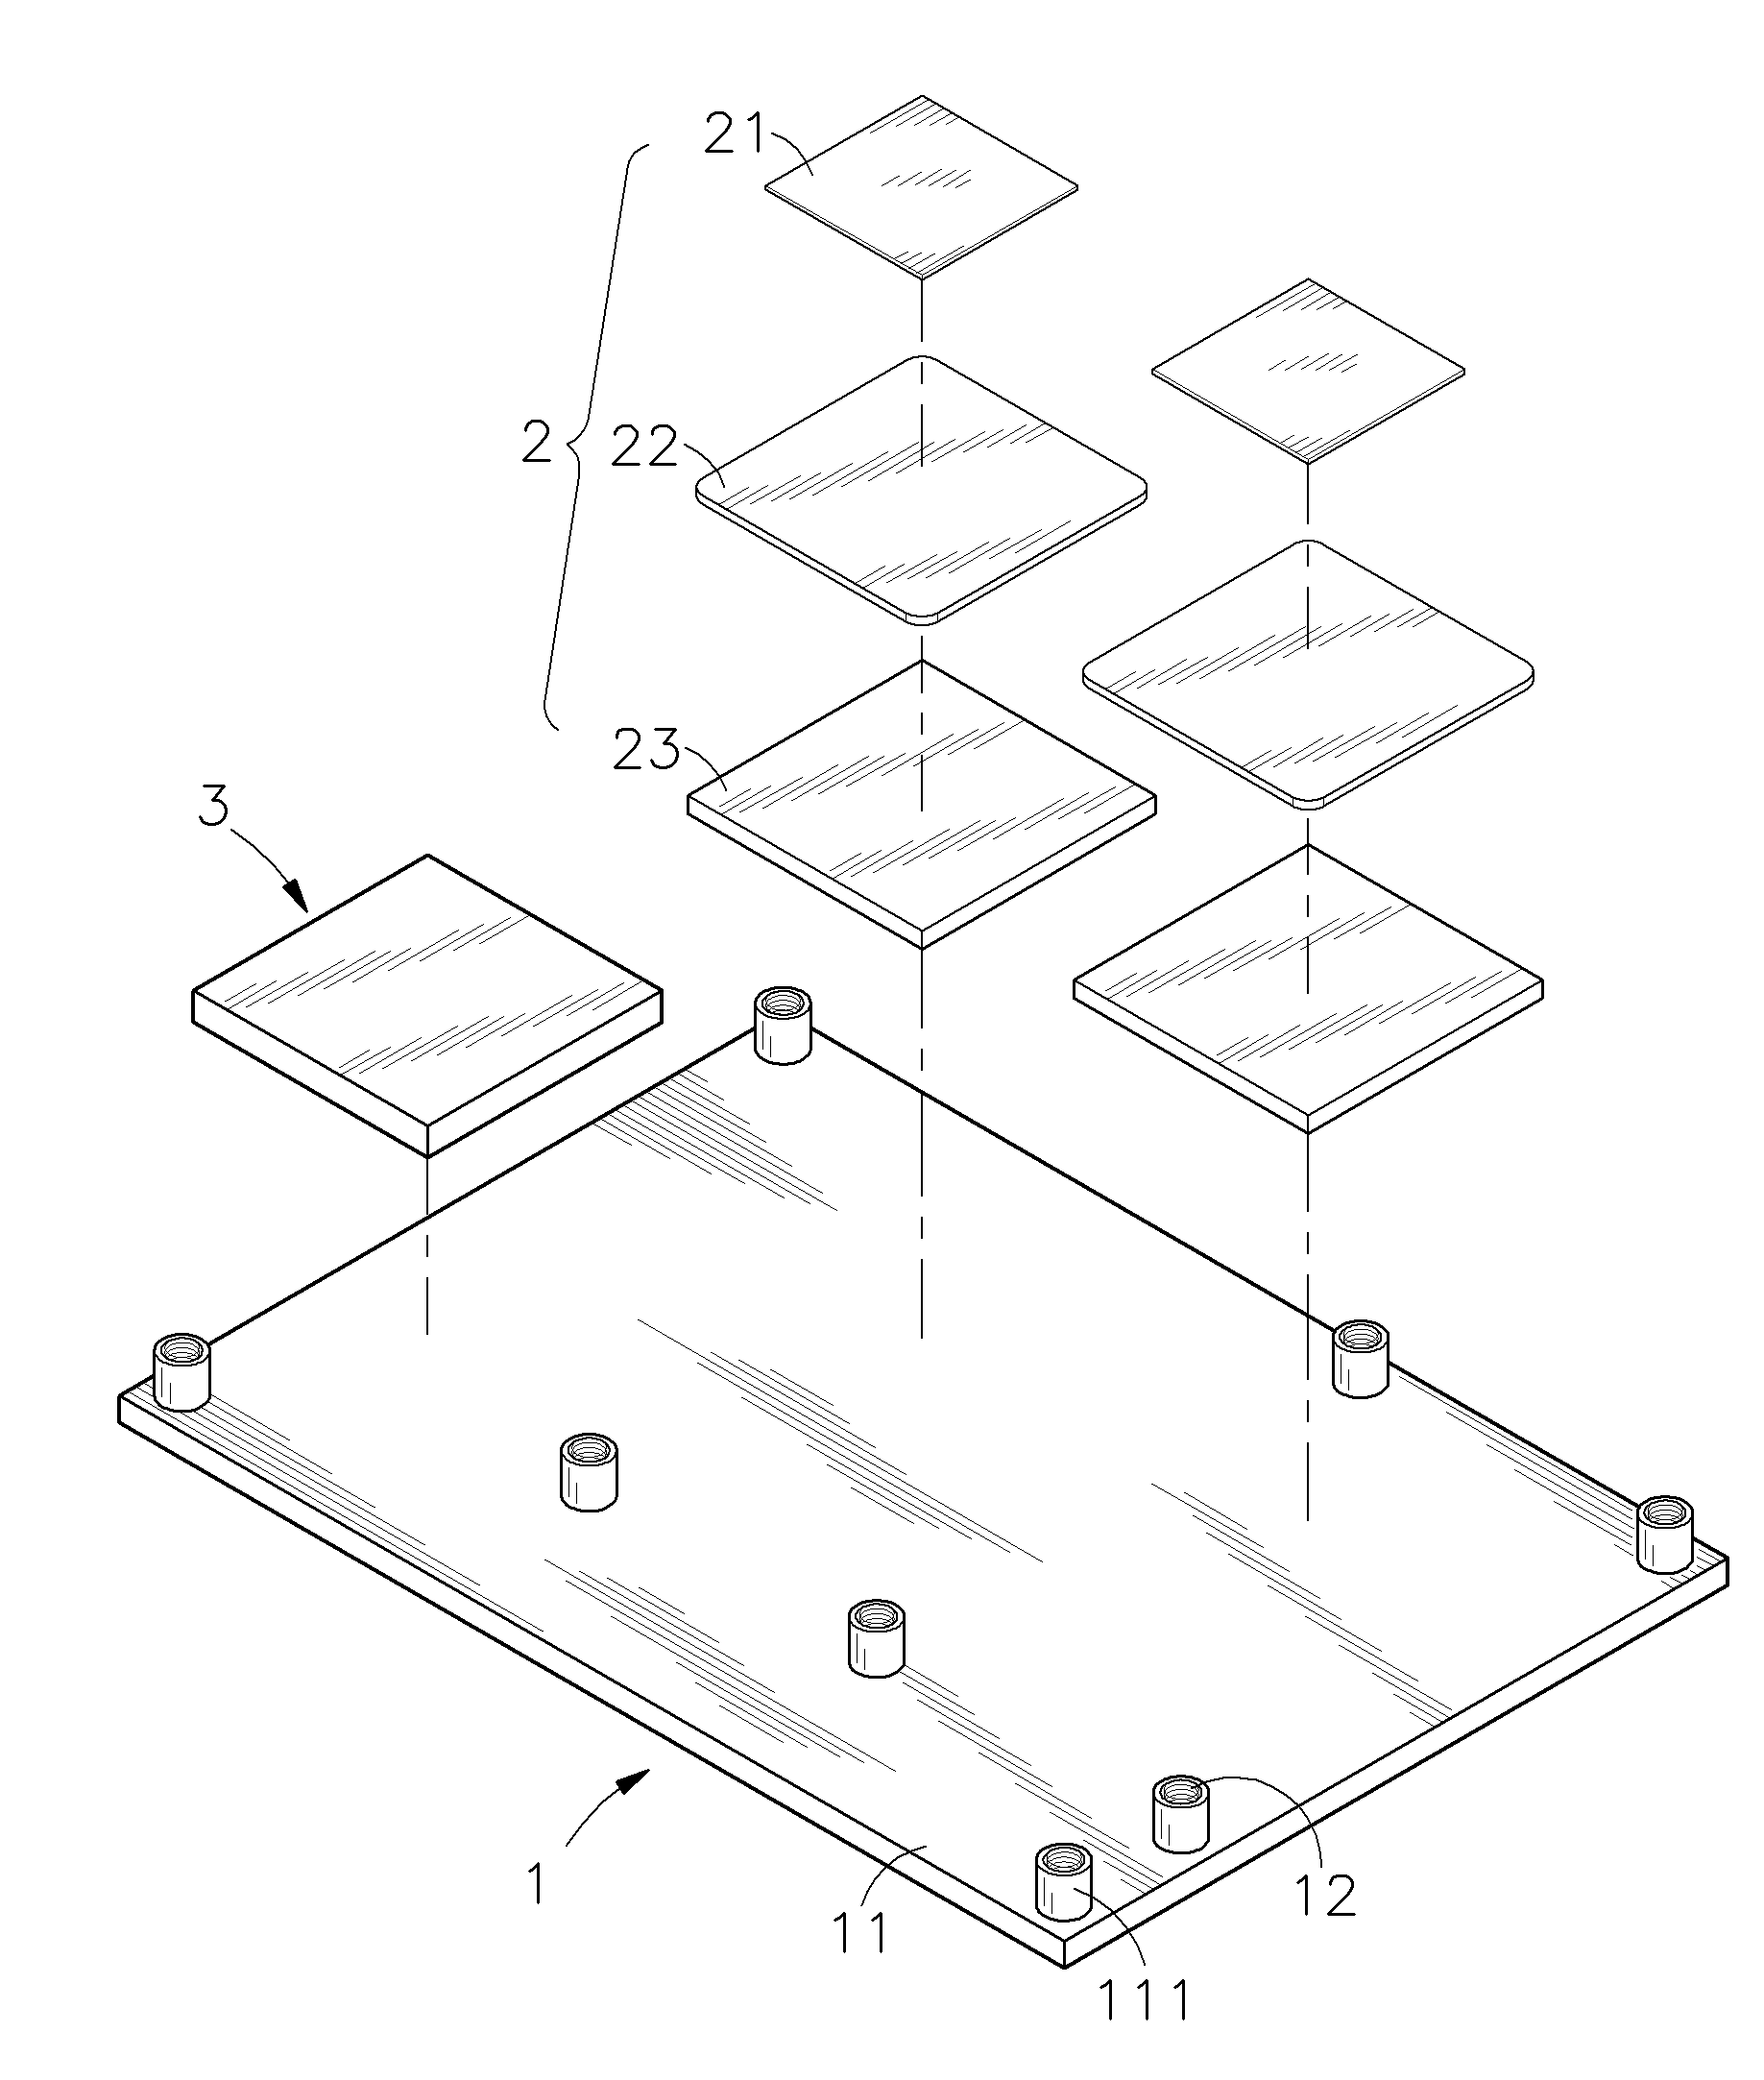 Stacked heat-transfer interface structure